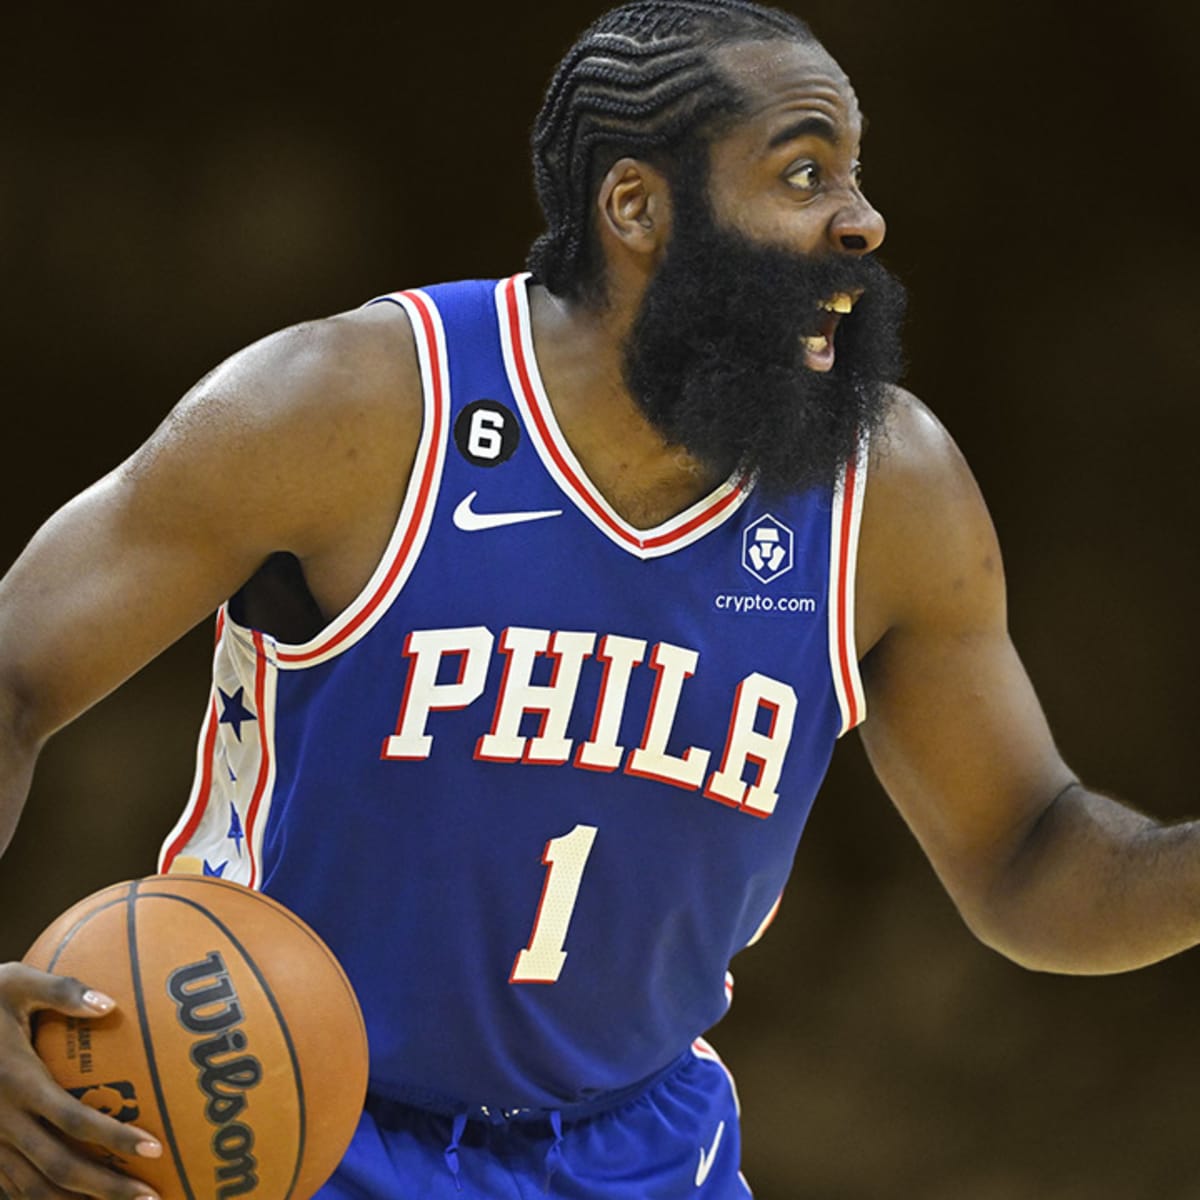 James Harden's true feelings on playing with Joel Embiid, Sixers